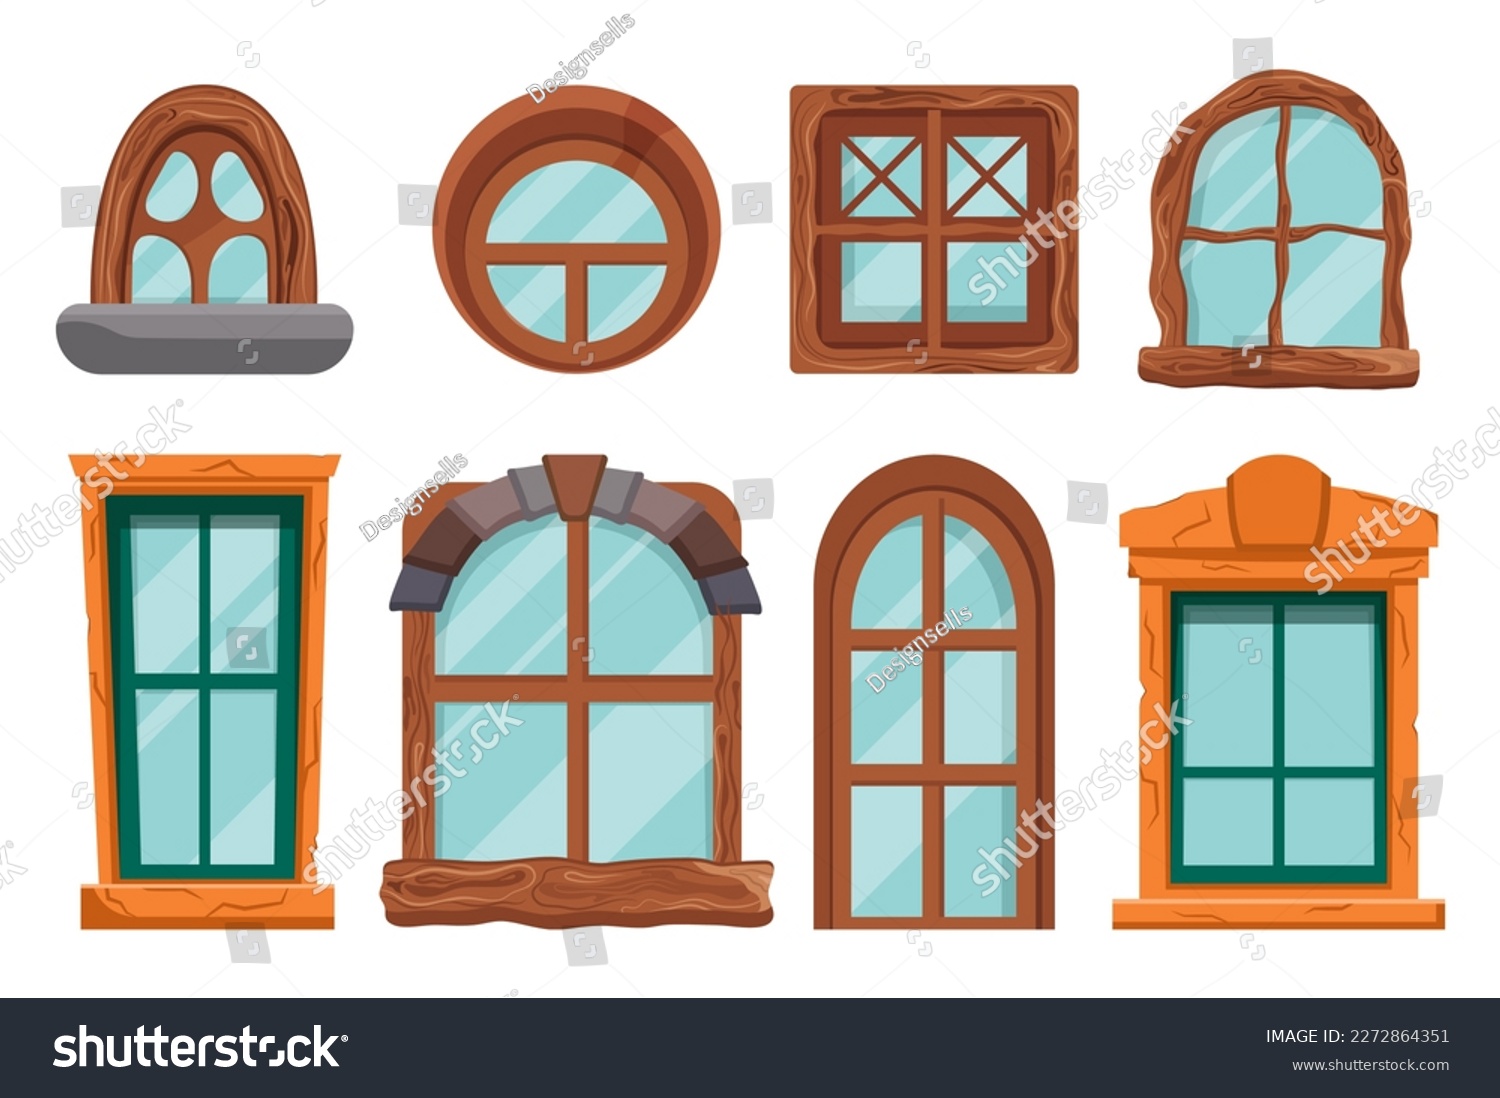 SVG of Hobbit house windows set concept without people scene in the flat cartoon design. Images of windows from Hobbit cartoons. Vector illustration. svg